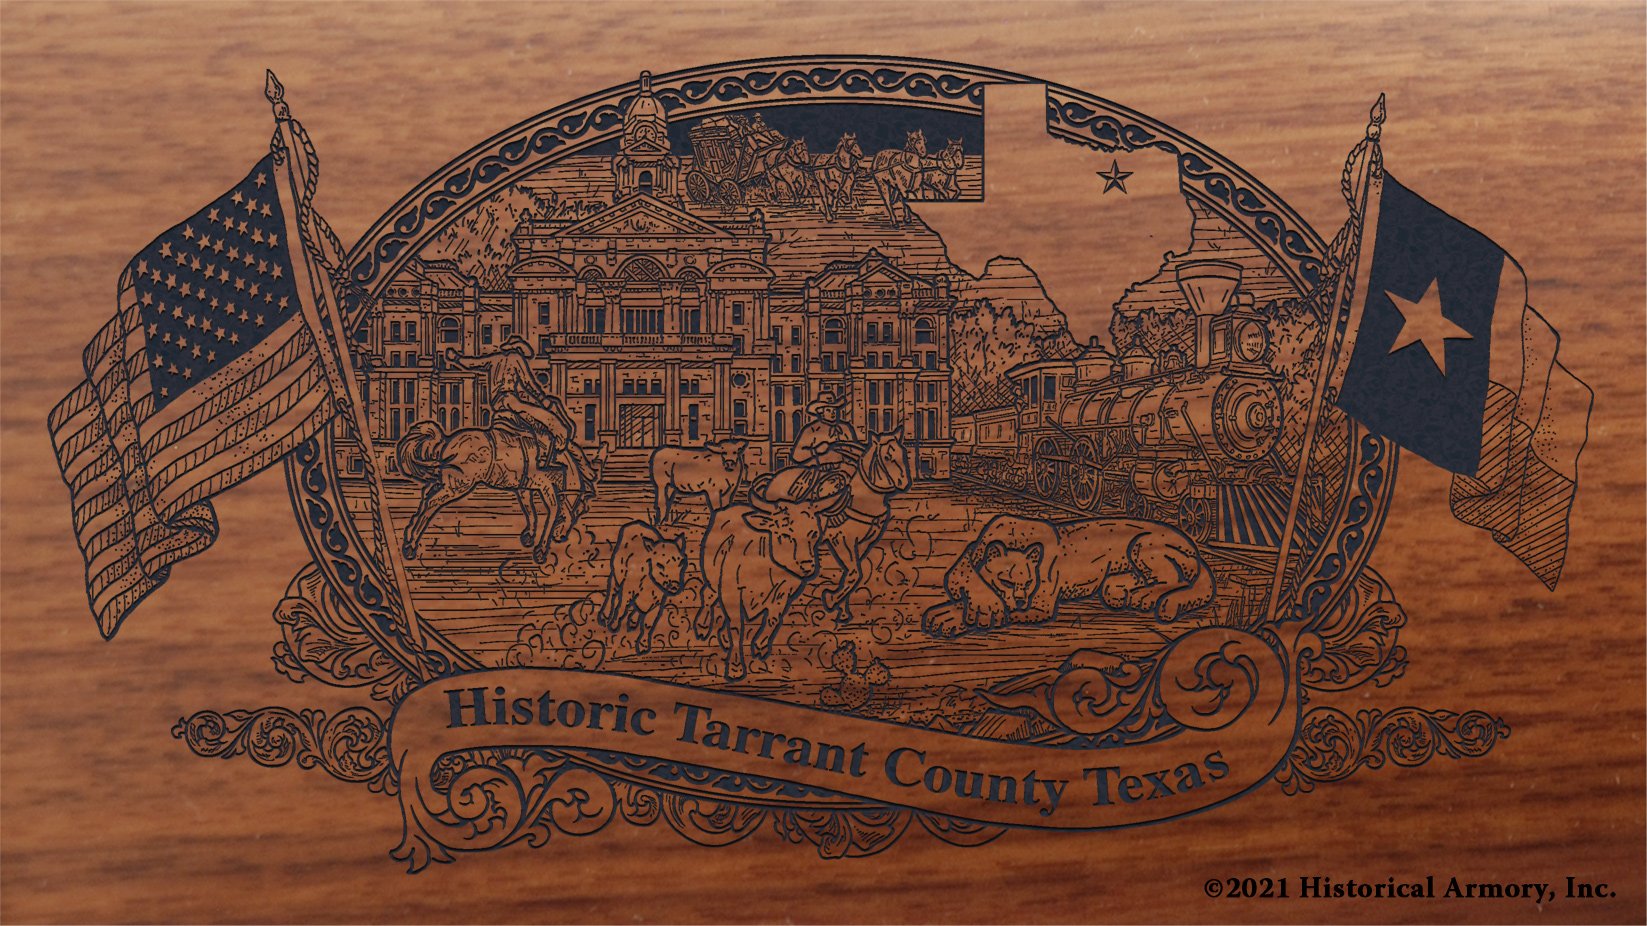 Engraved artwork | History of Tarrant County Texas | Historical Armory